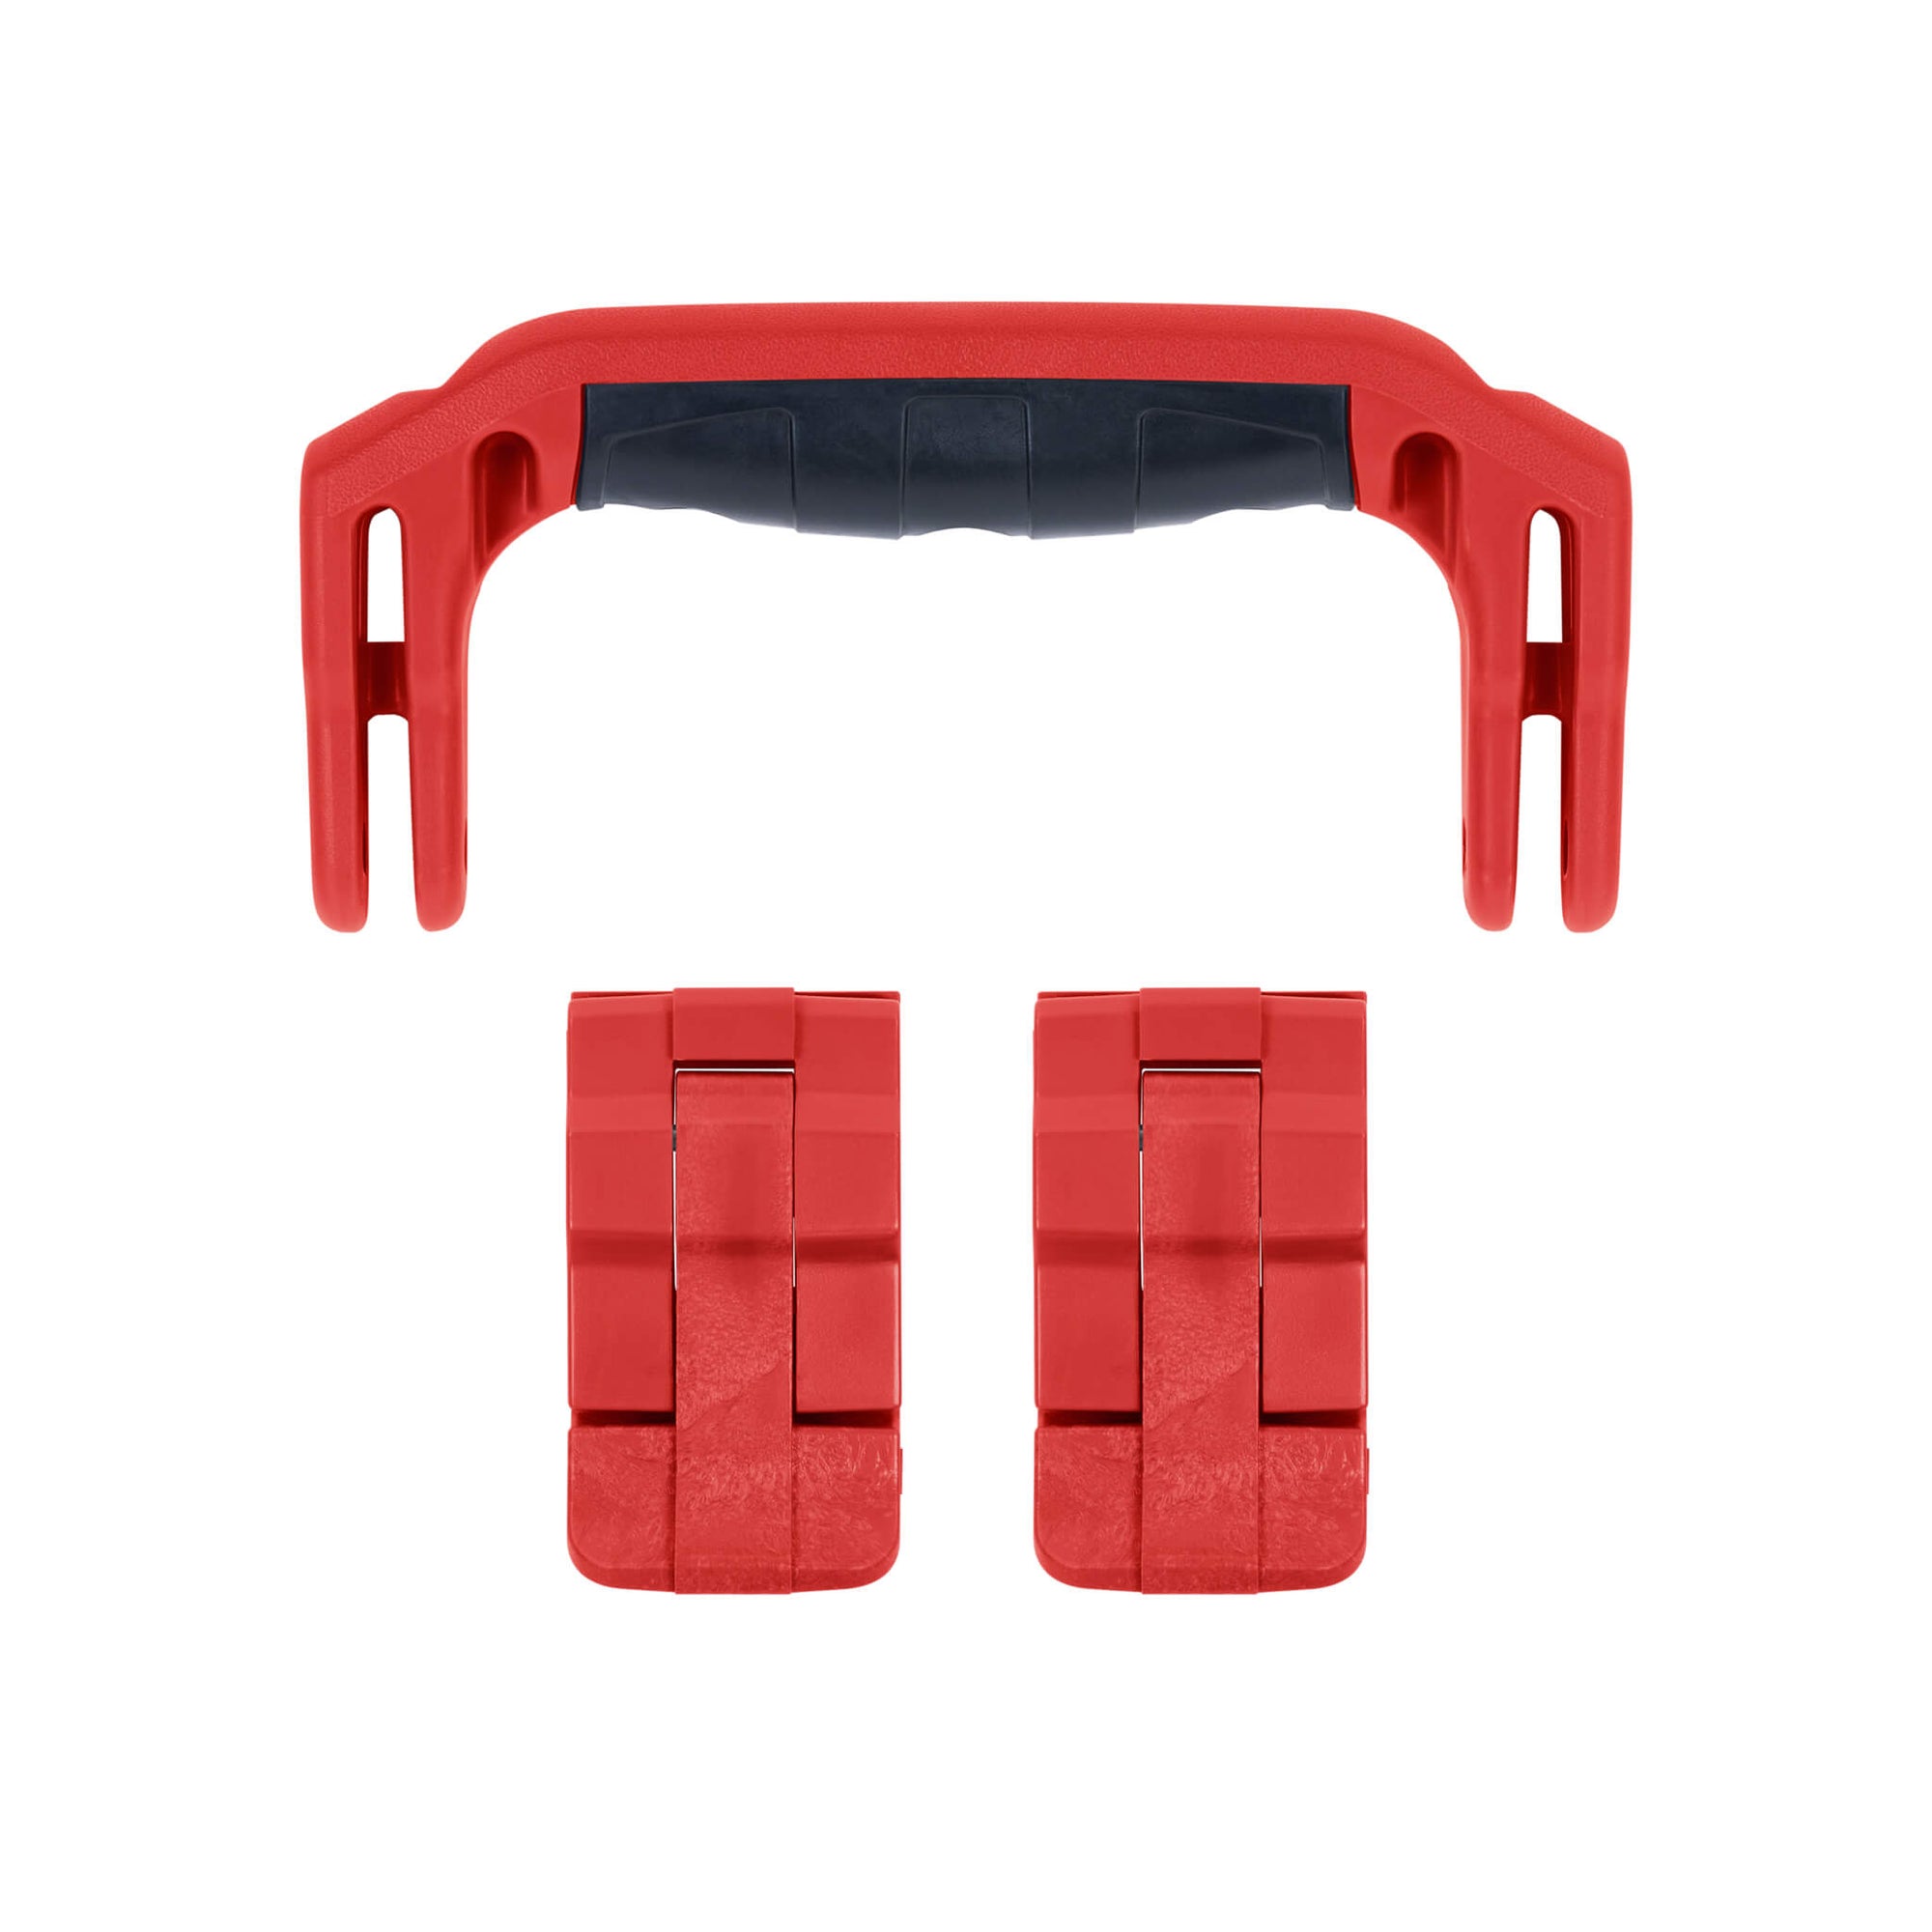 Pelican 1430 Replacement Handle & Latches, Red (Set of 1 Handle, 2 Latches) ColorCase 